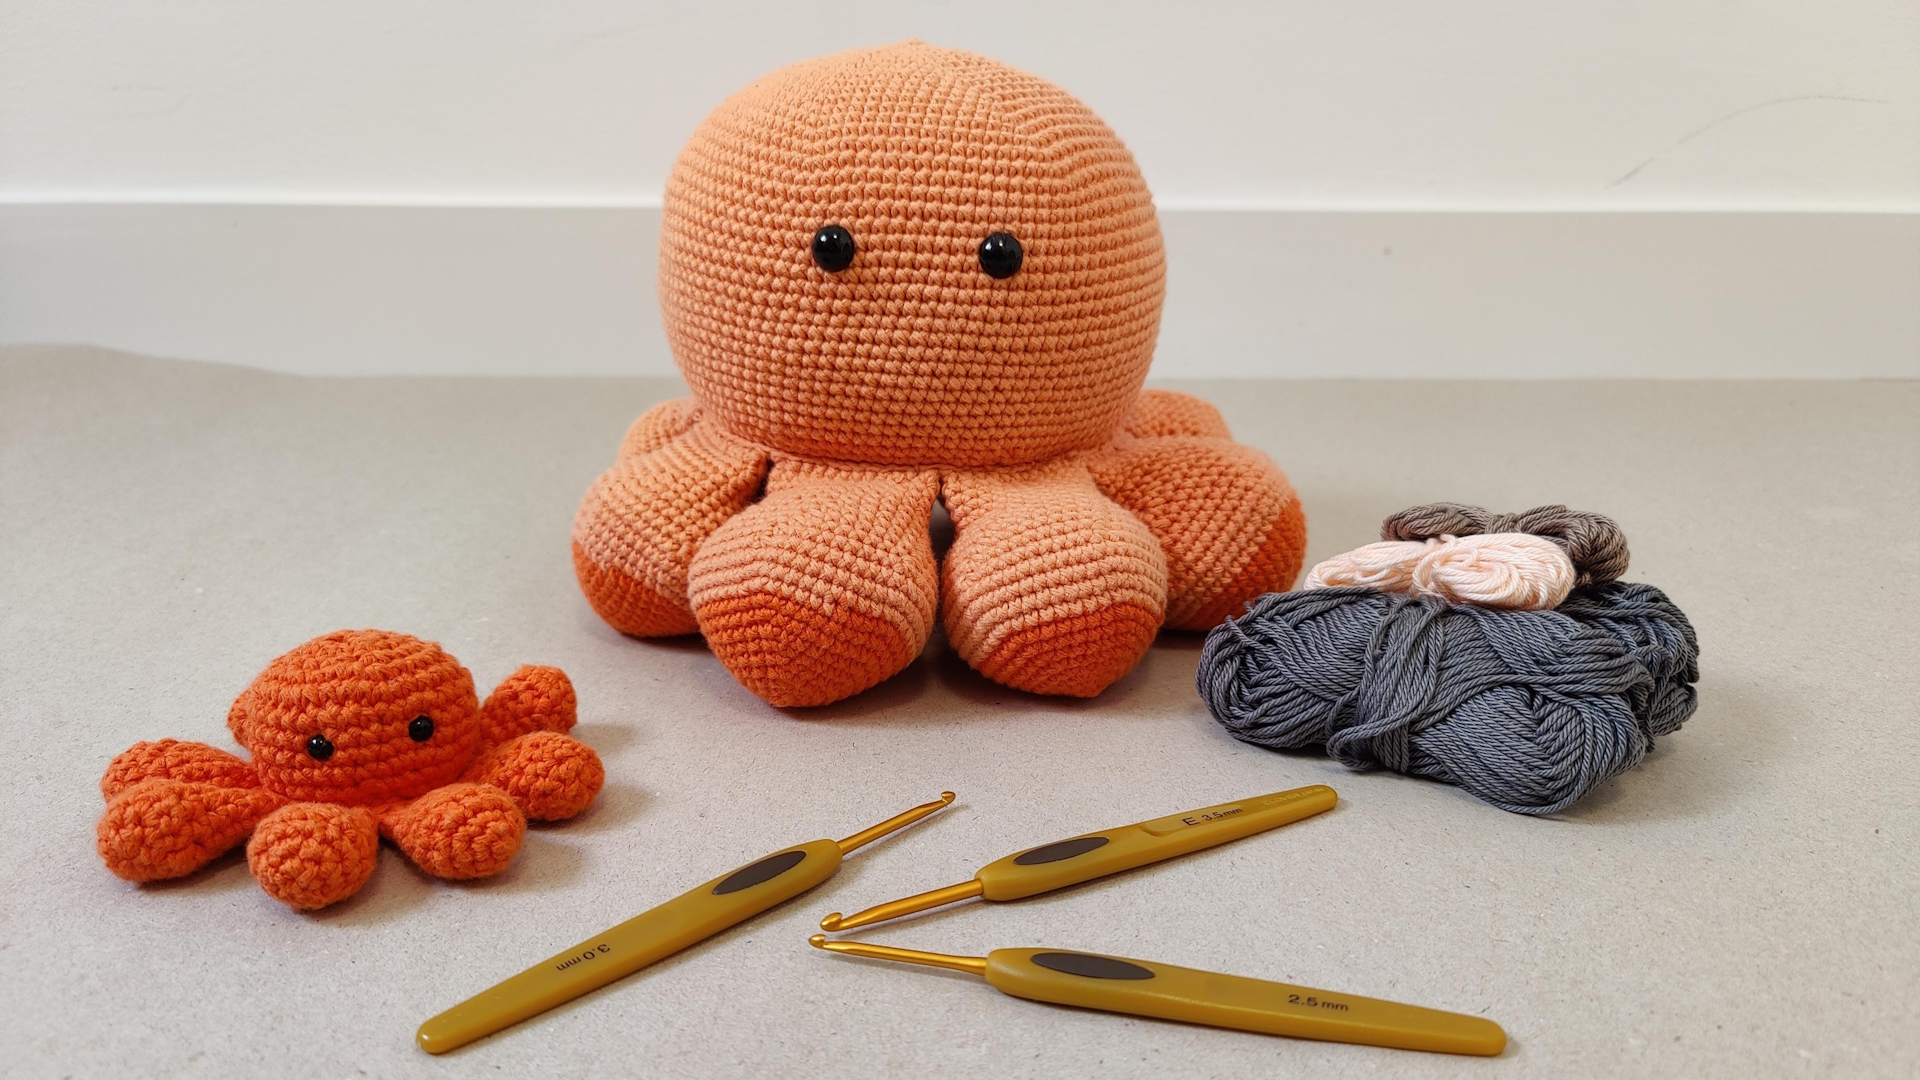 Best crochet kits: Kickstart your crochet with super creative, easy-to-do projects